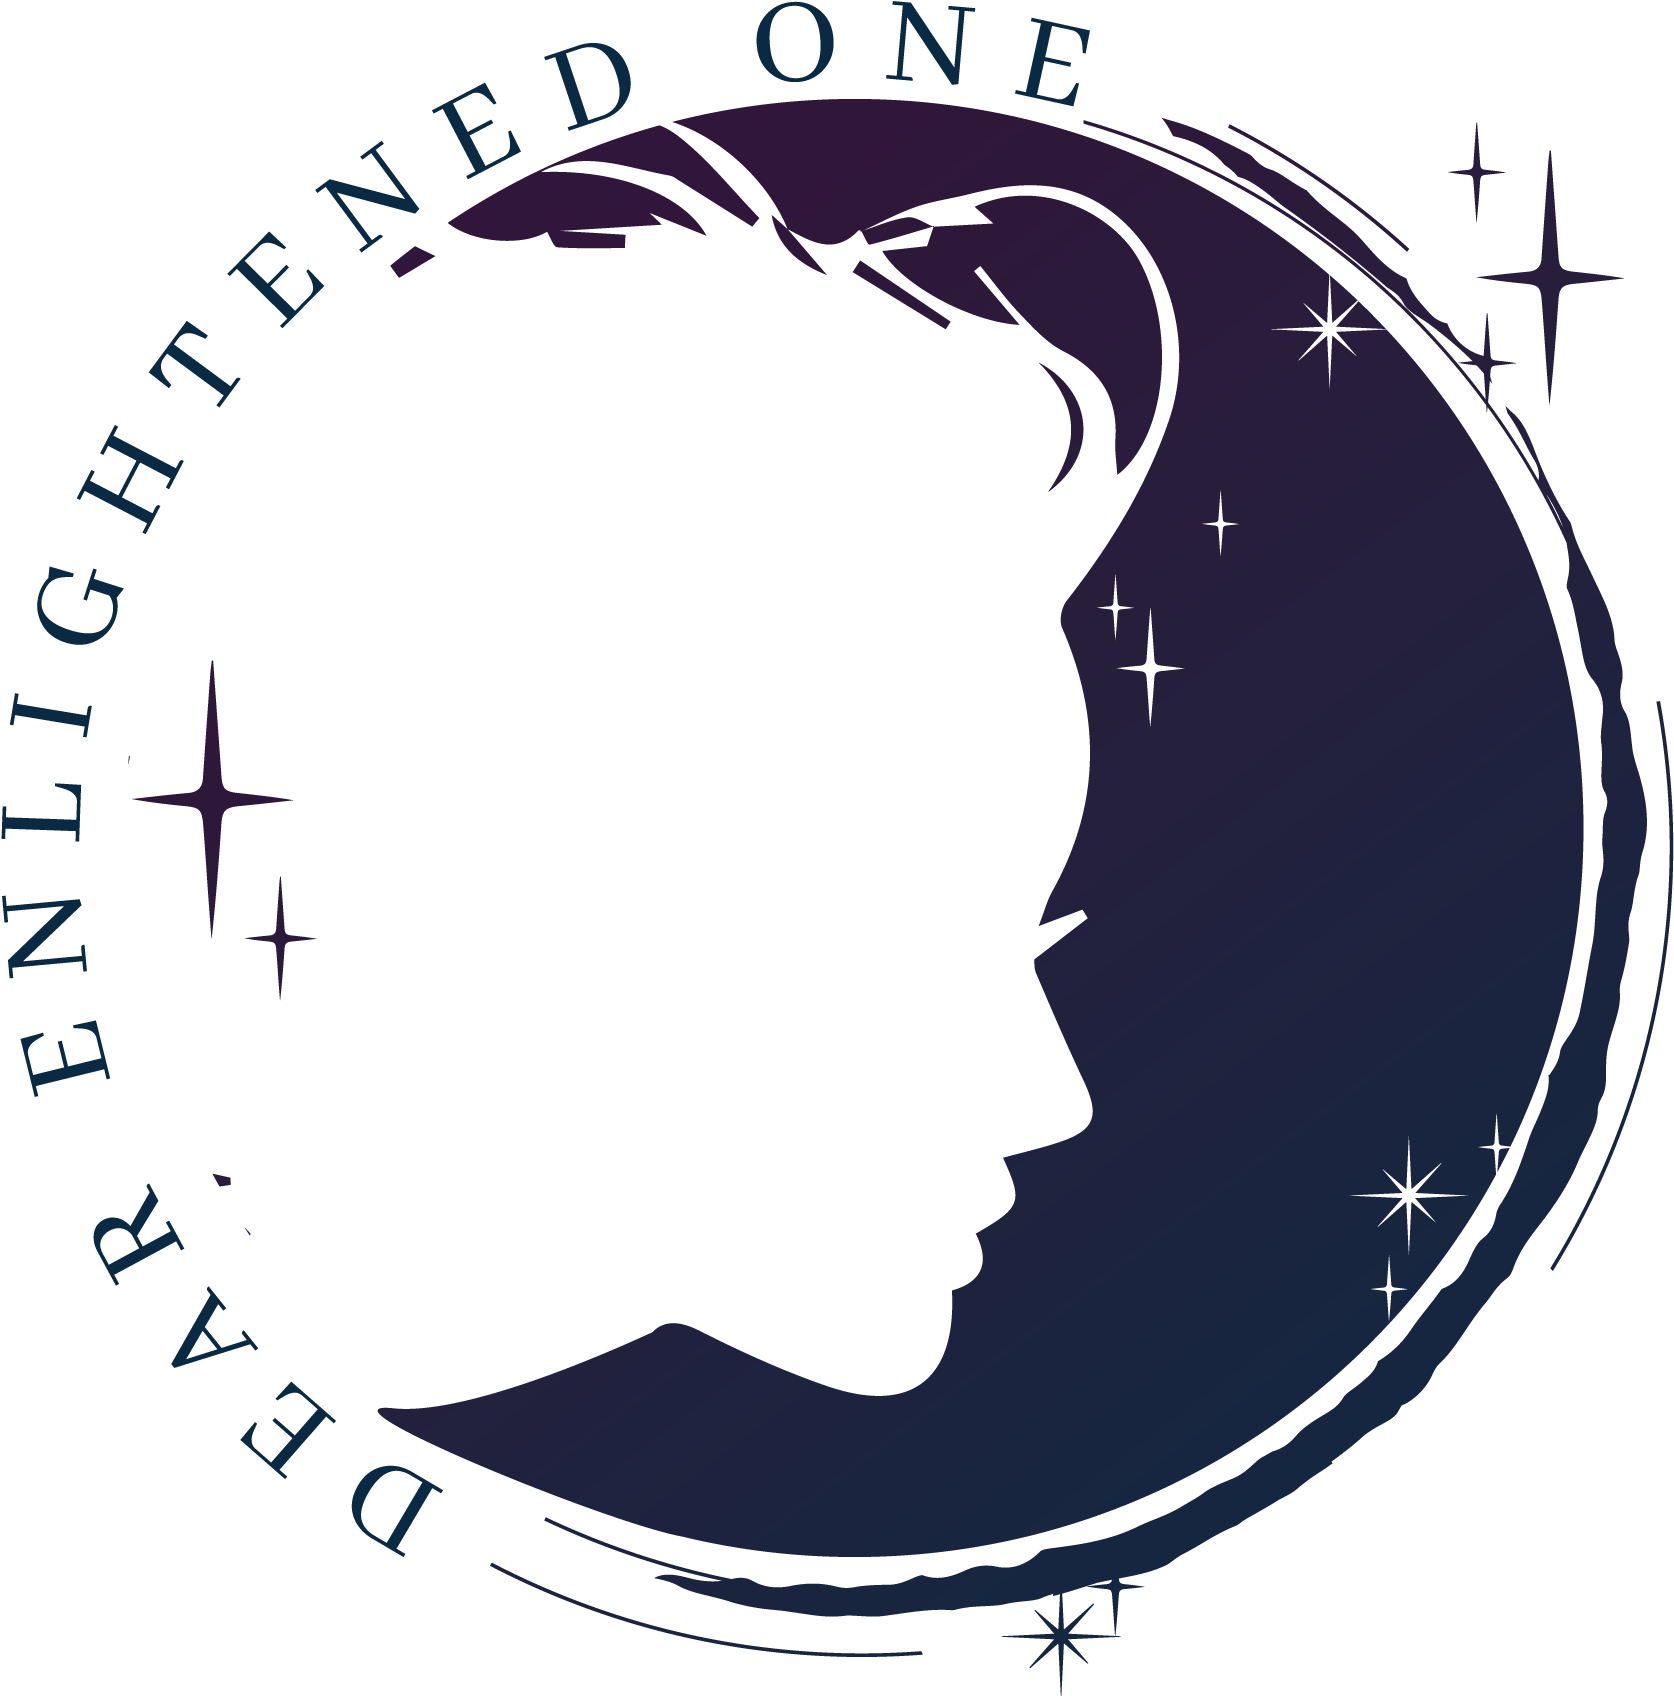 Enlightened One Silhouette Graphic PNG